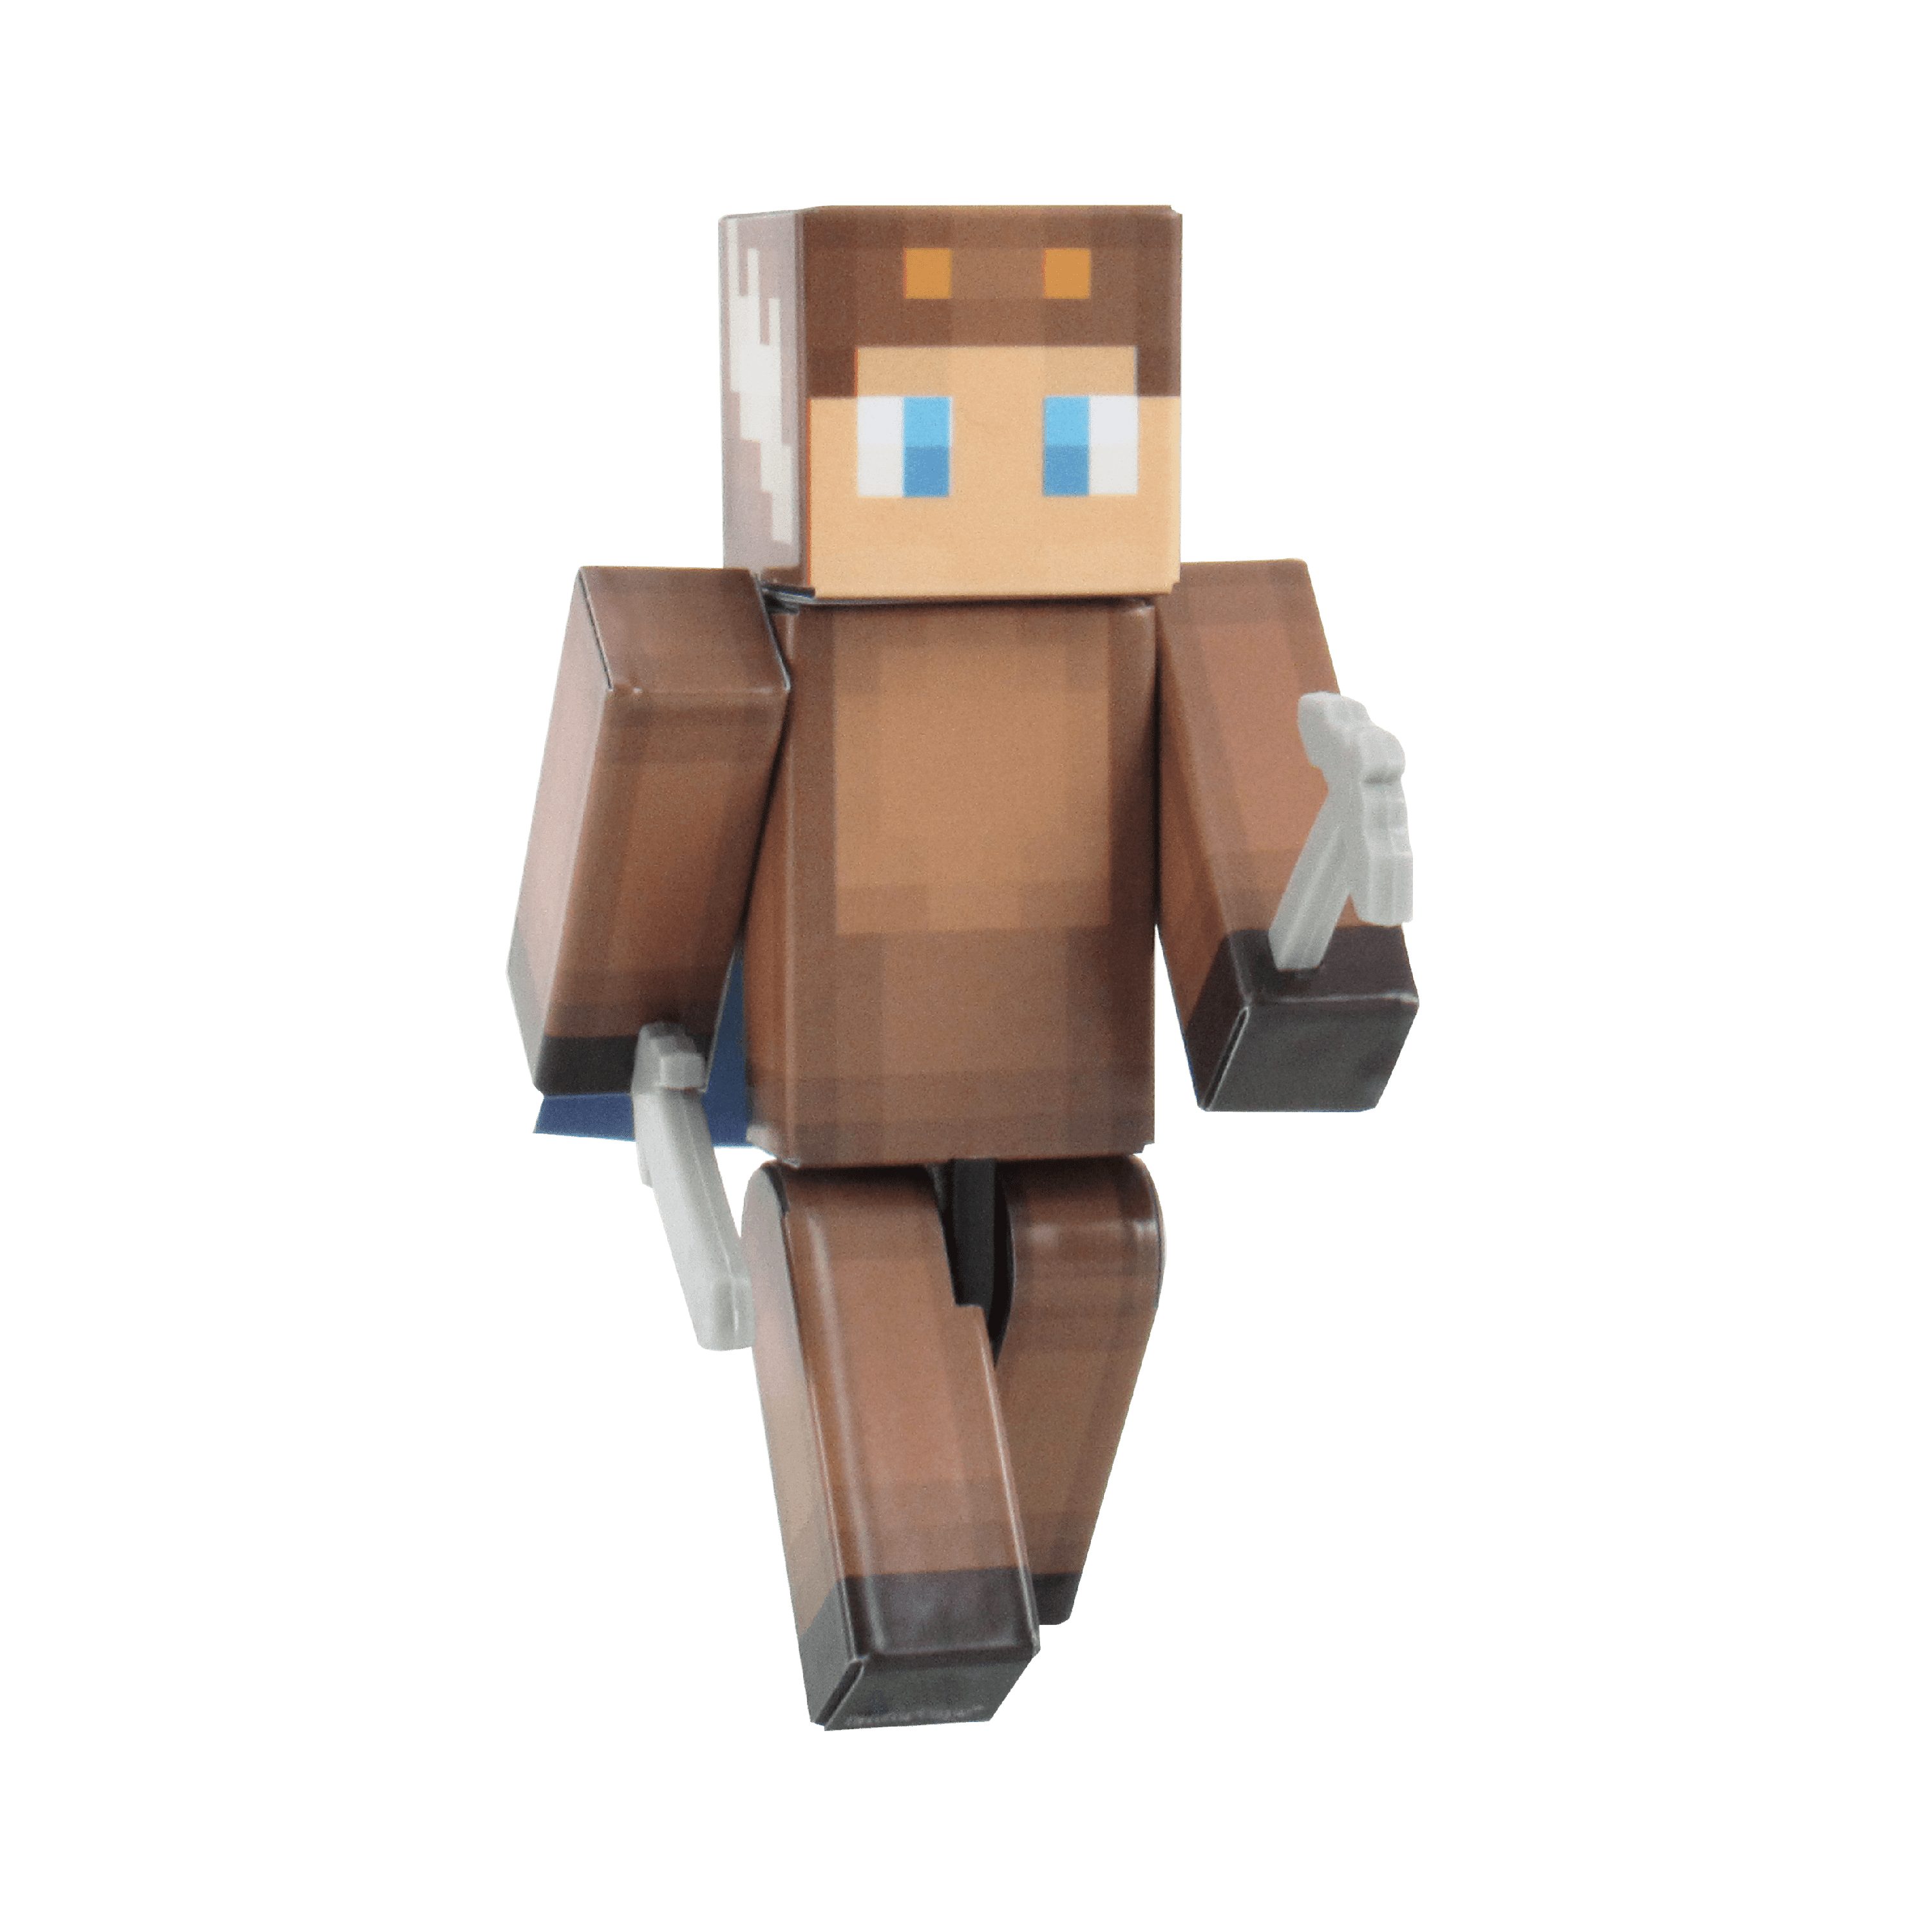 Canadian Moose Action Figure Toy 4 Inch Custom Series Figurines By Endertoys Not An Official Minecraft Product Walmart Com Walmart Com - i have finally finished my trade art roblox amino